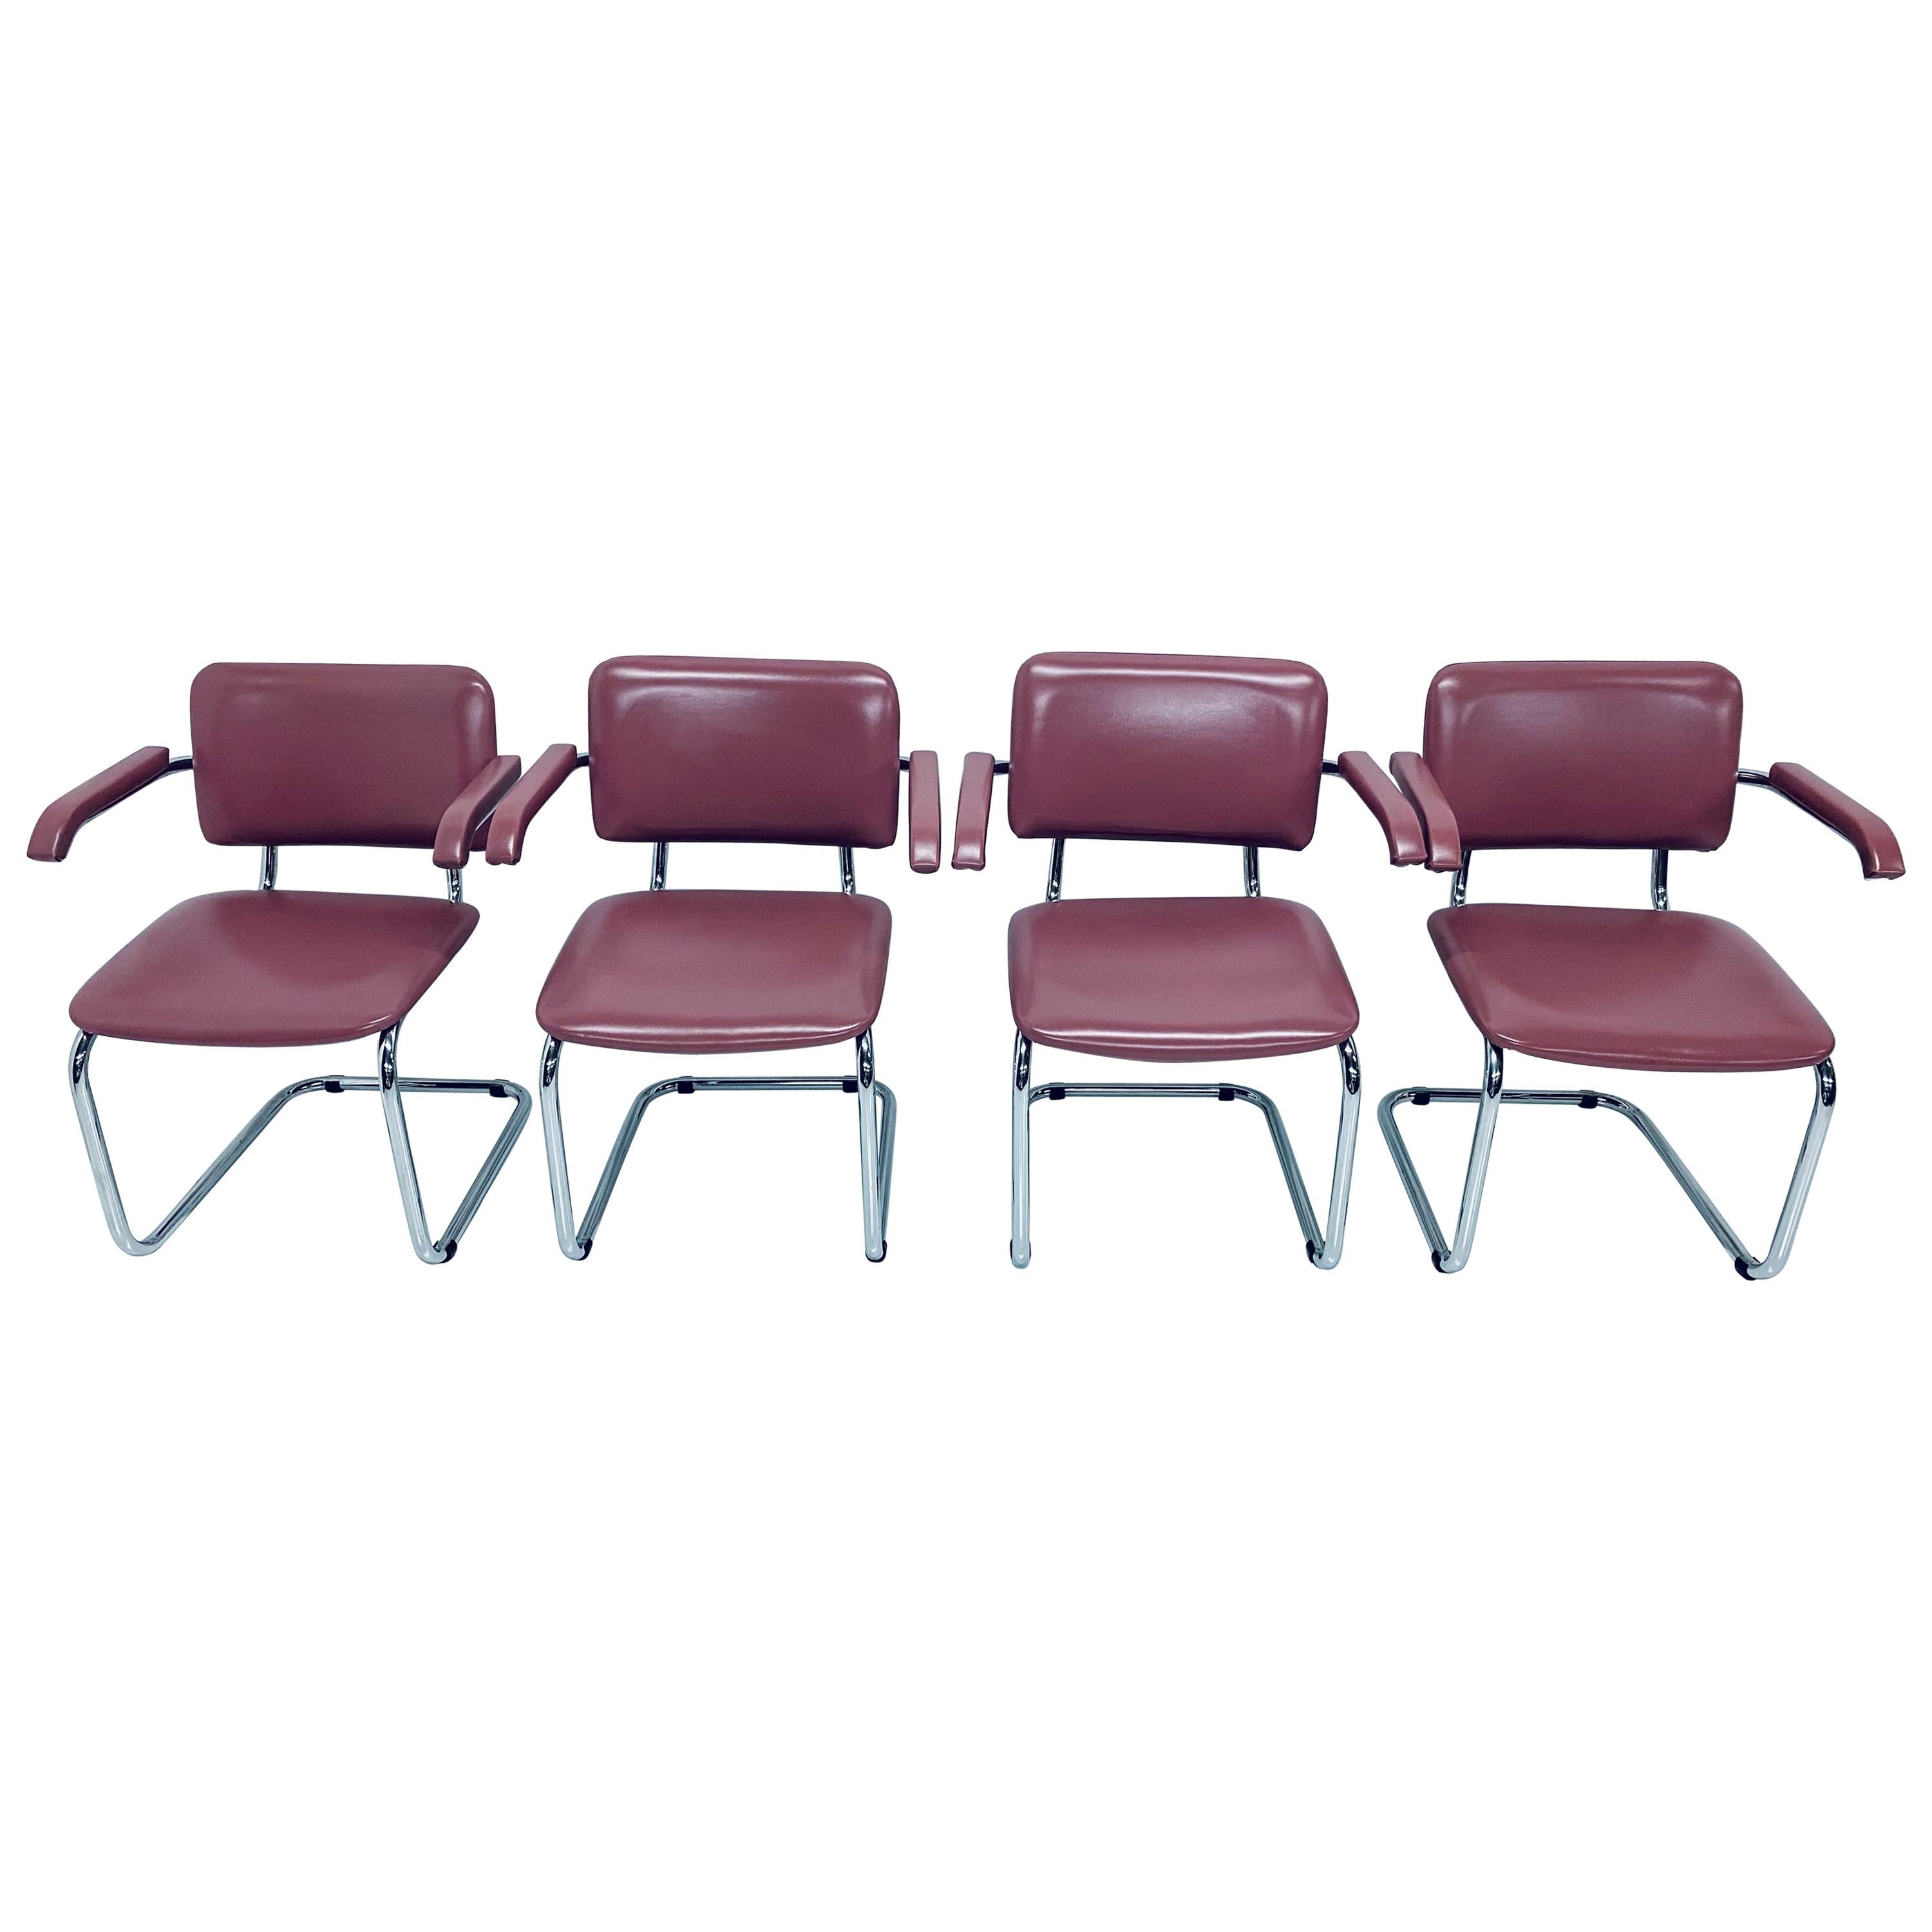 Set of Four Marcel Breuer Cesca Chrome Dining Chairs in Pink Naugahyde, 1970s